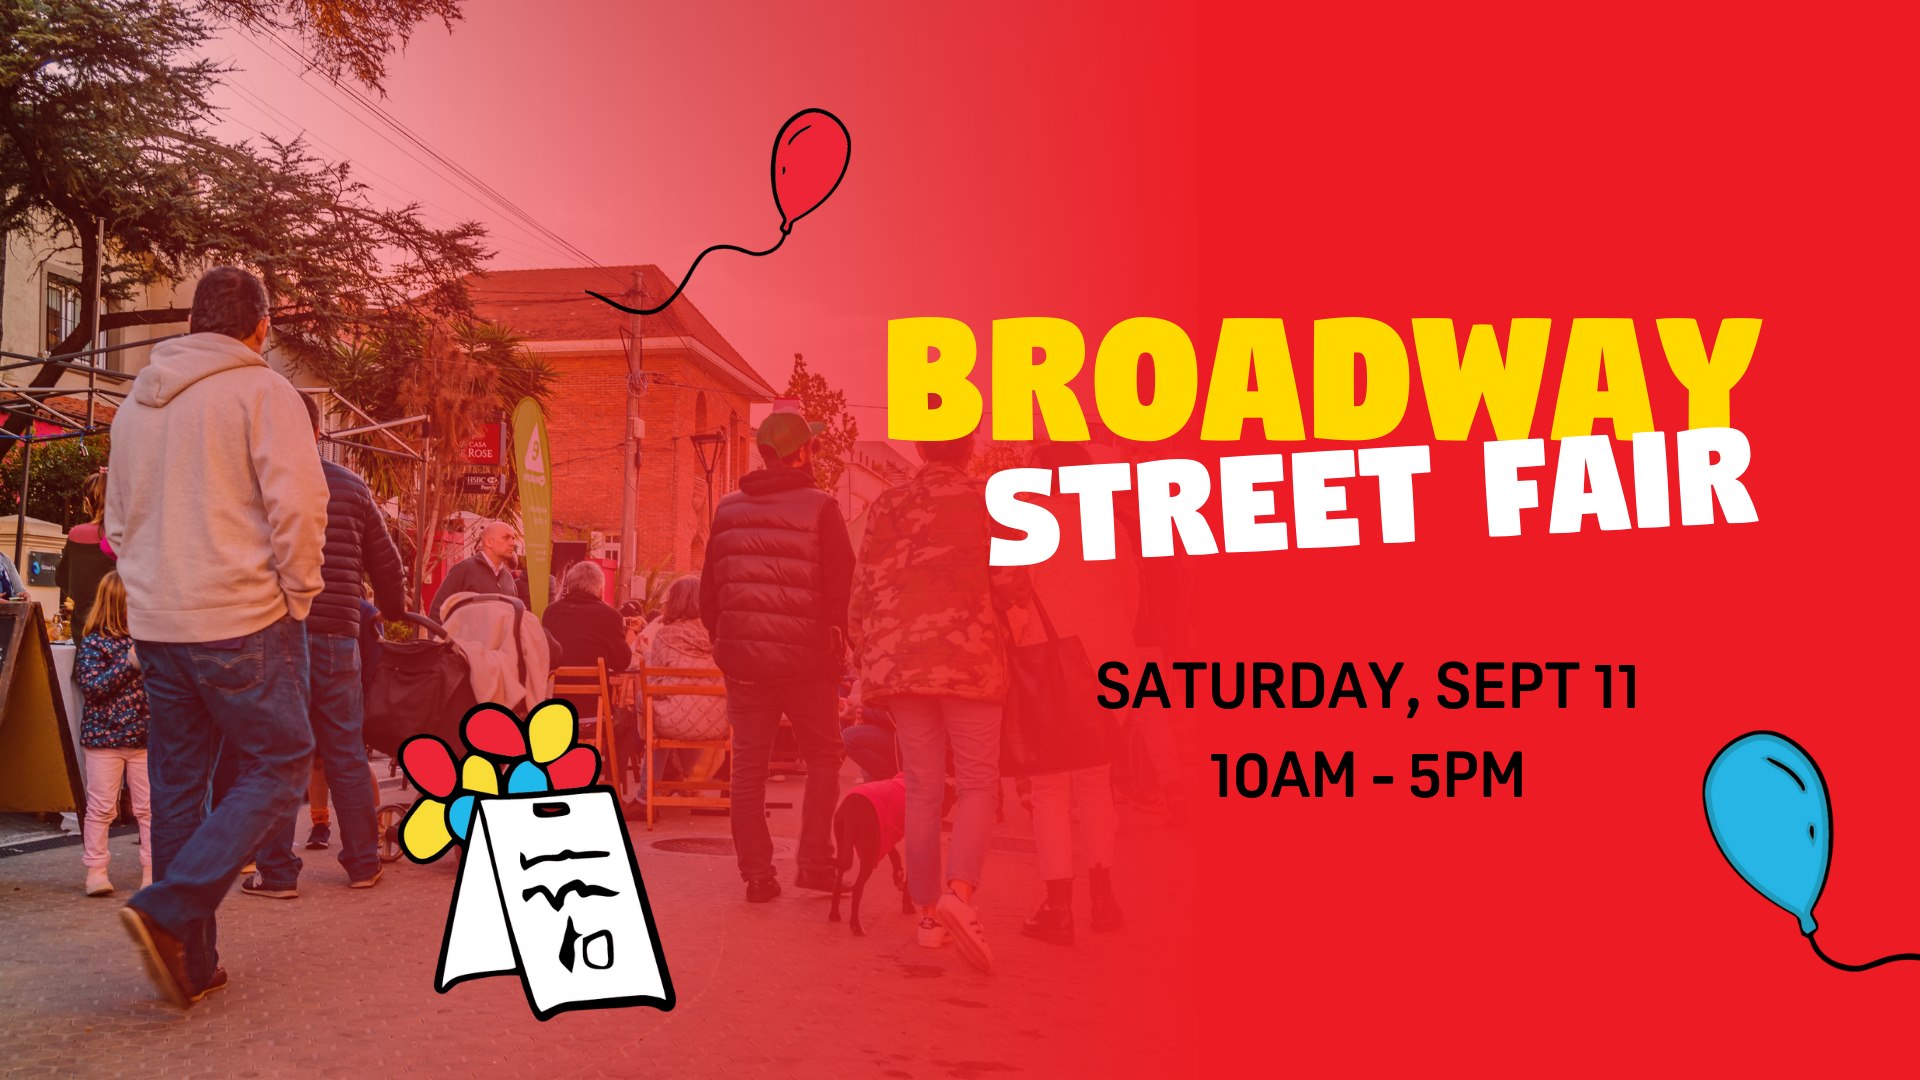 Don't Miss Broadway District's Biggest Event of the Year The Broadway